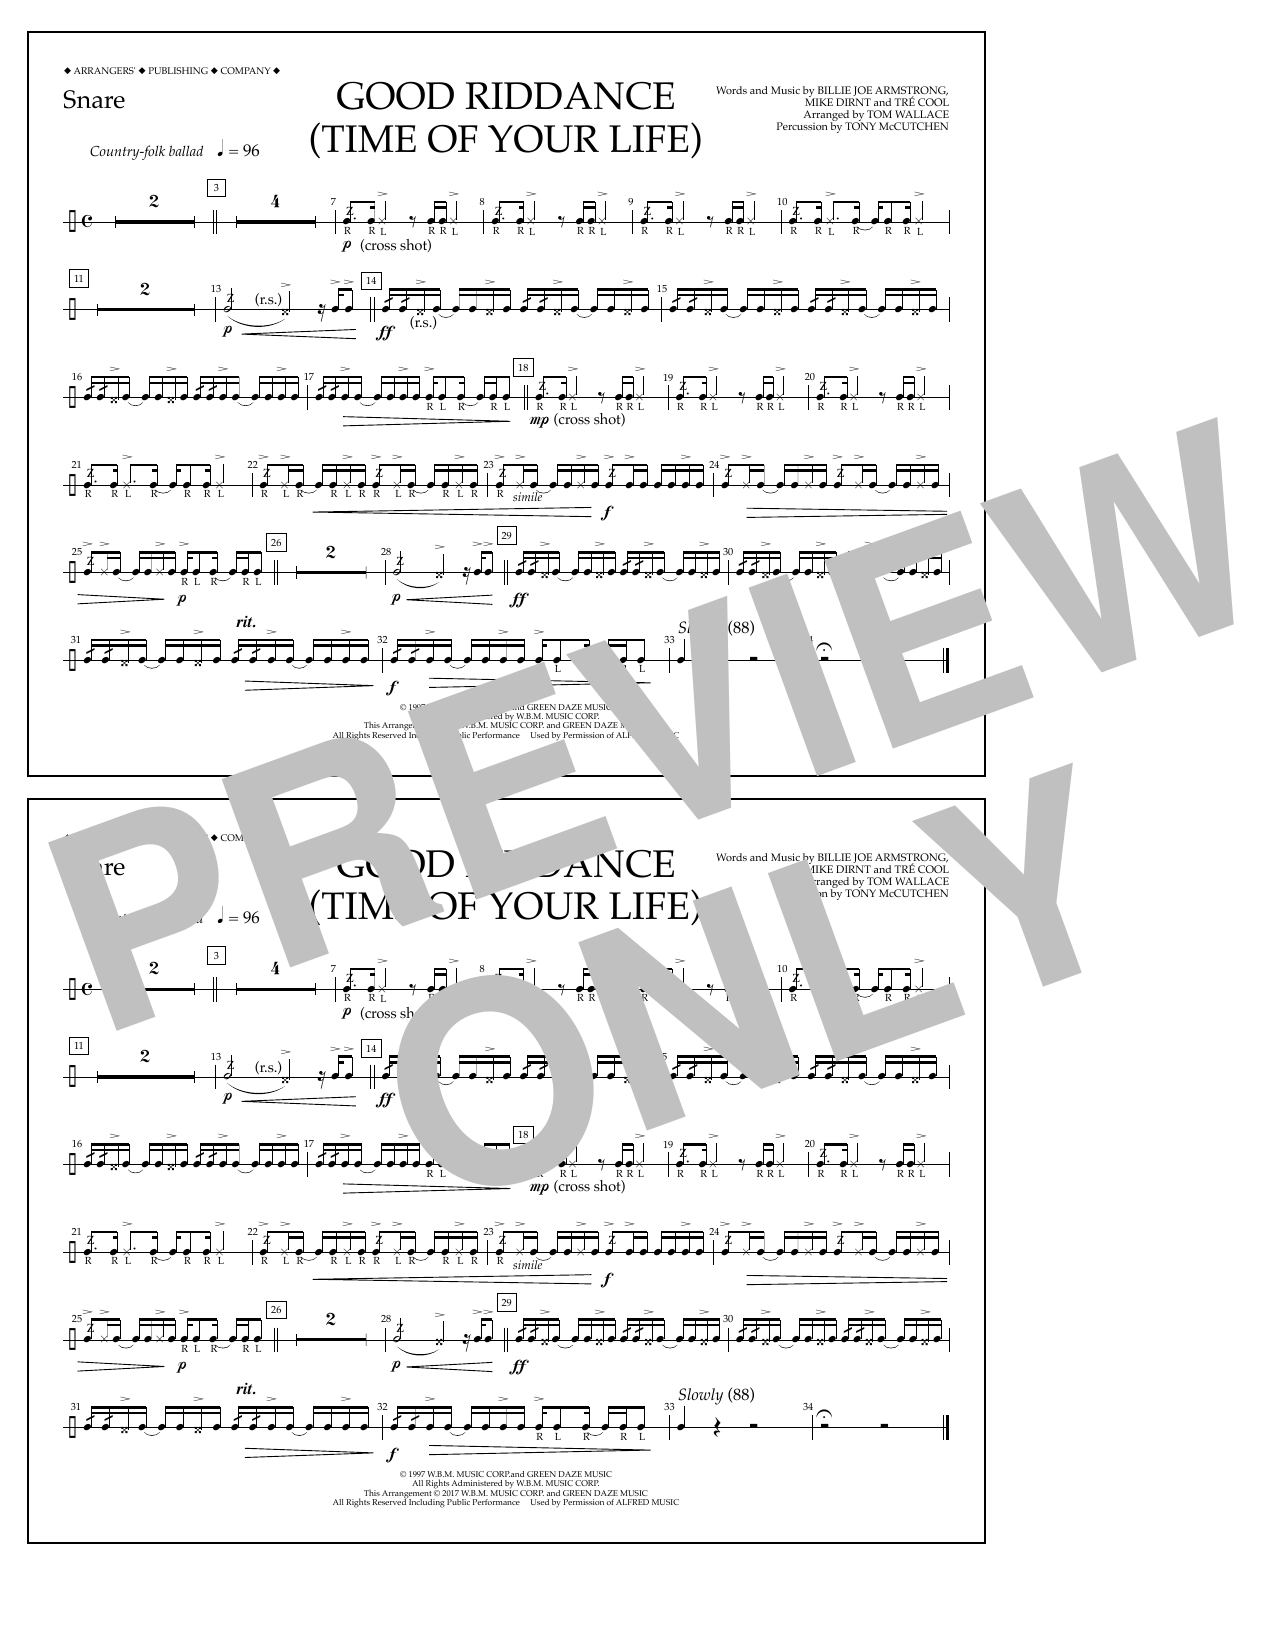 Download Tom Wallace Good Riddance (Time of Your Life) - Sna Sheet Music